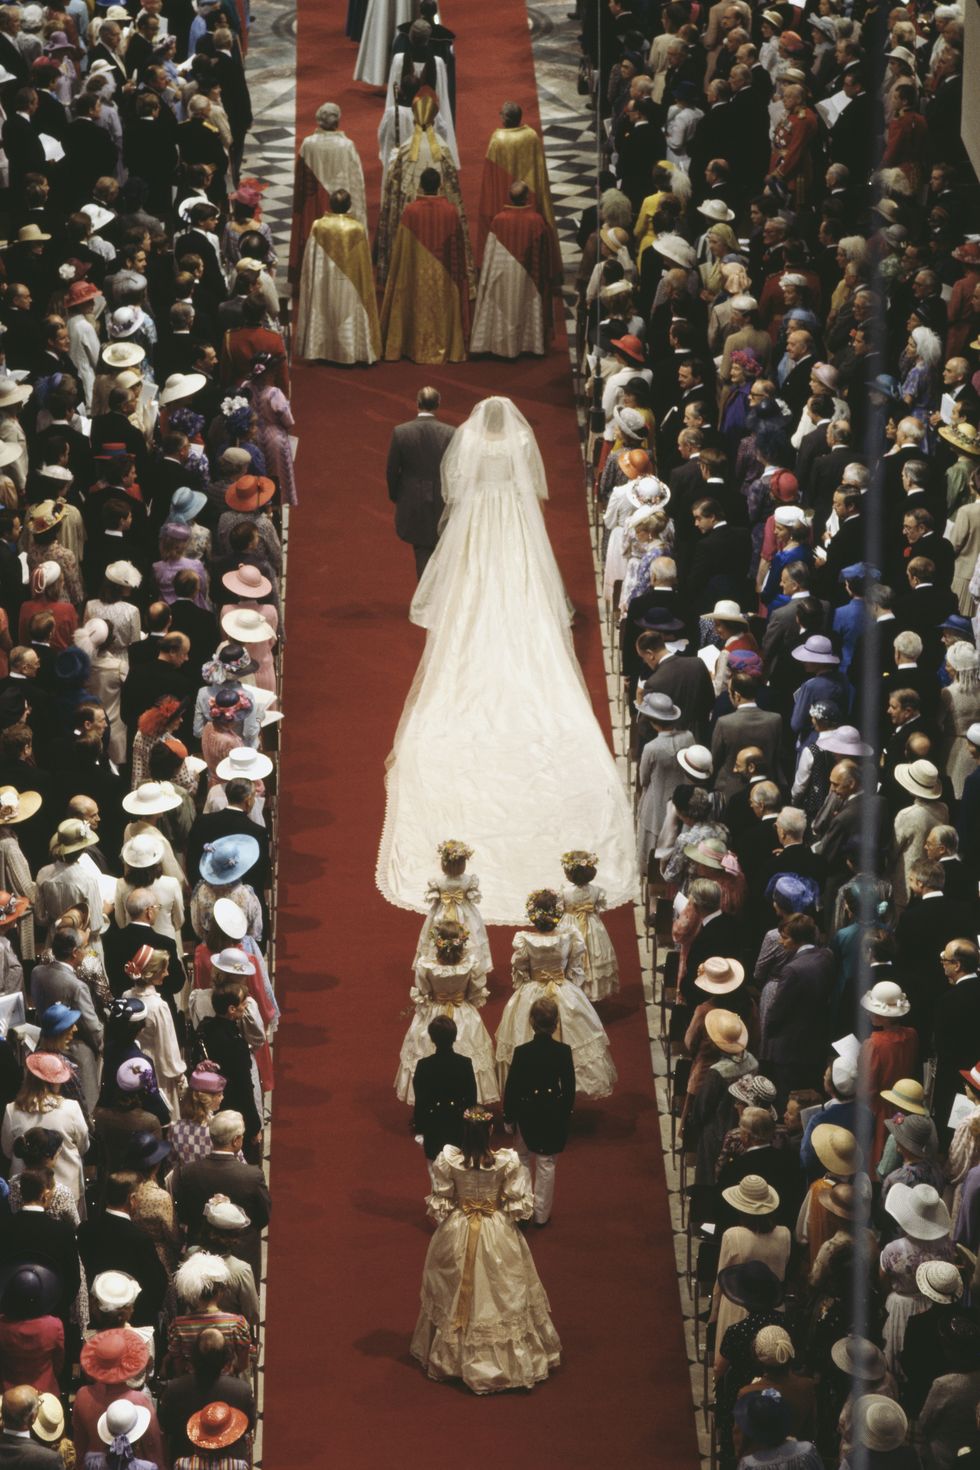 wedding of charles and diana